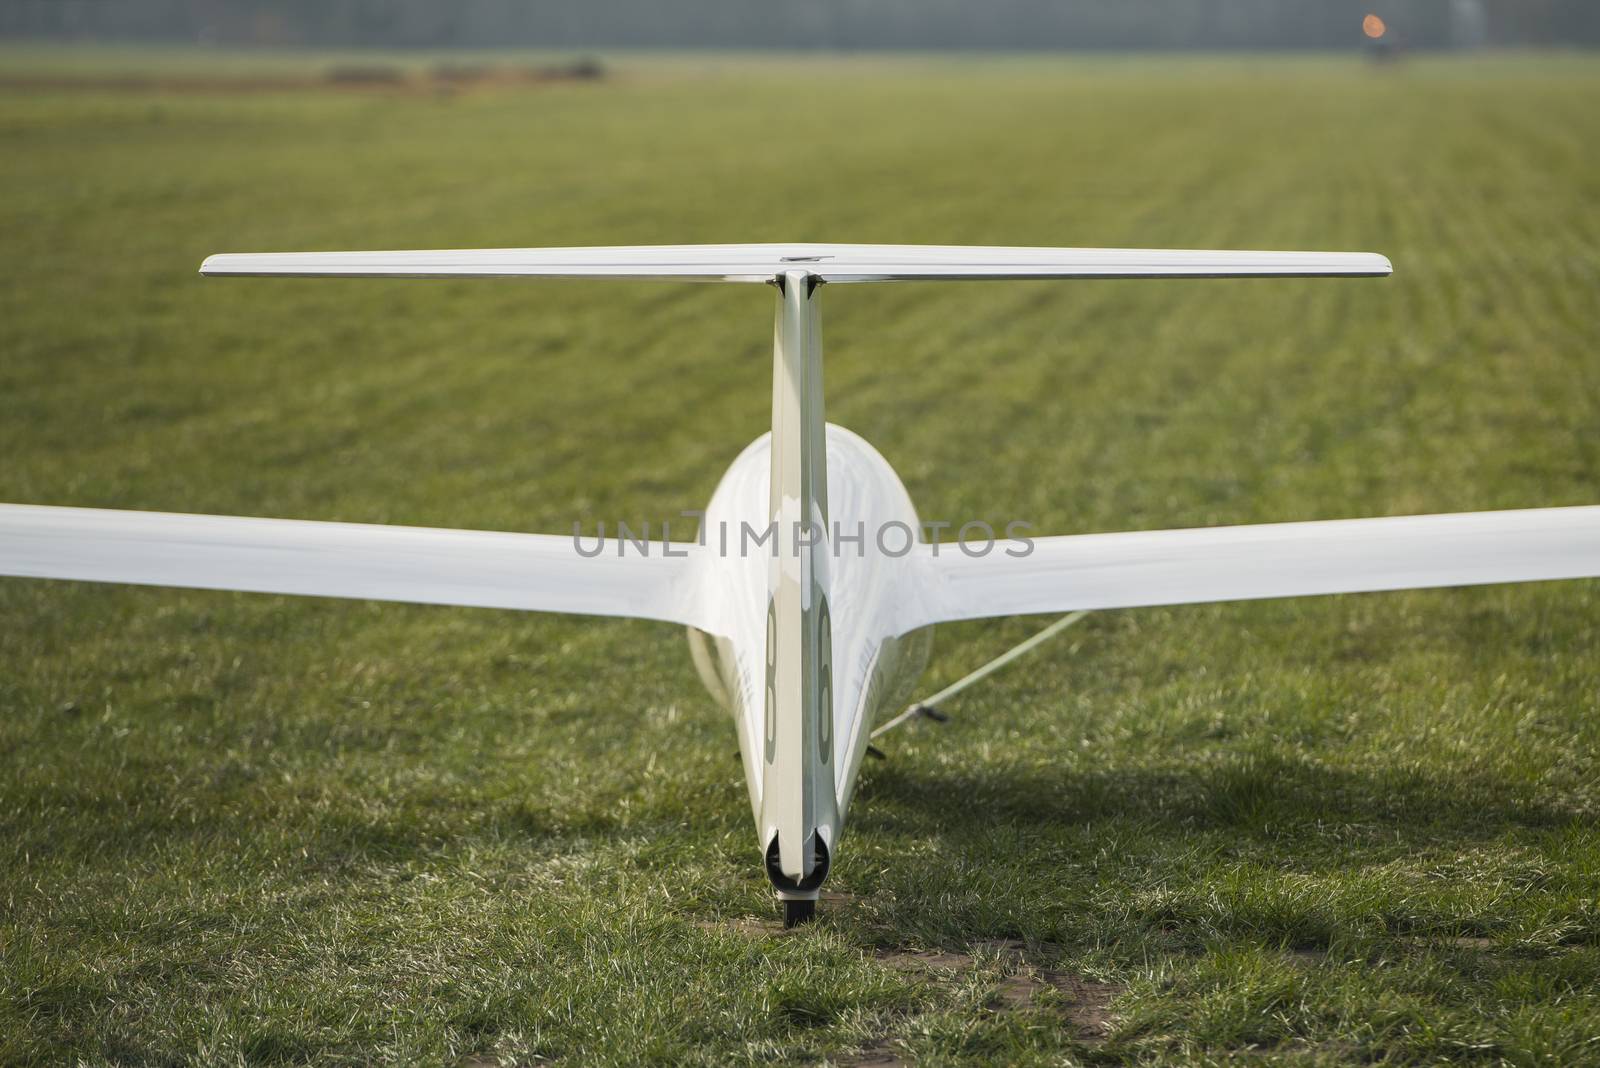 Pull up a glider on an airfield nearby the Dutch border in Germany